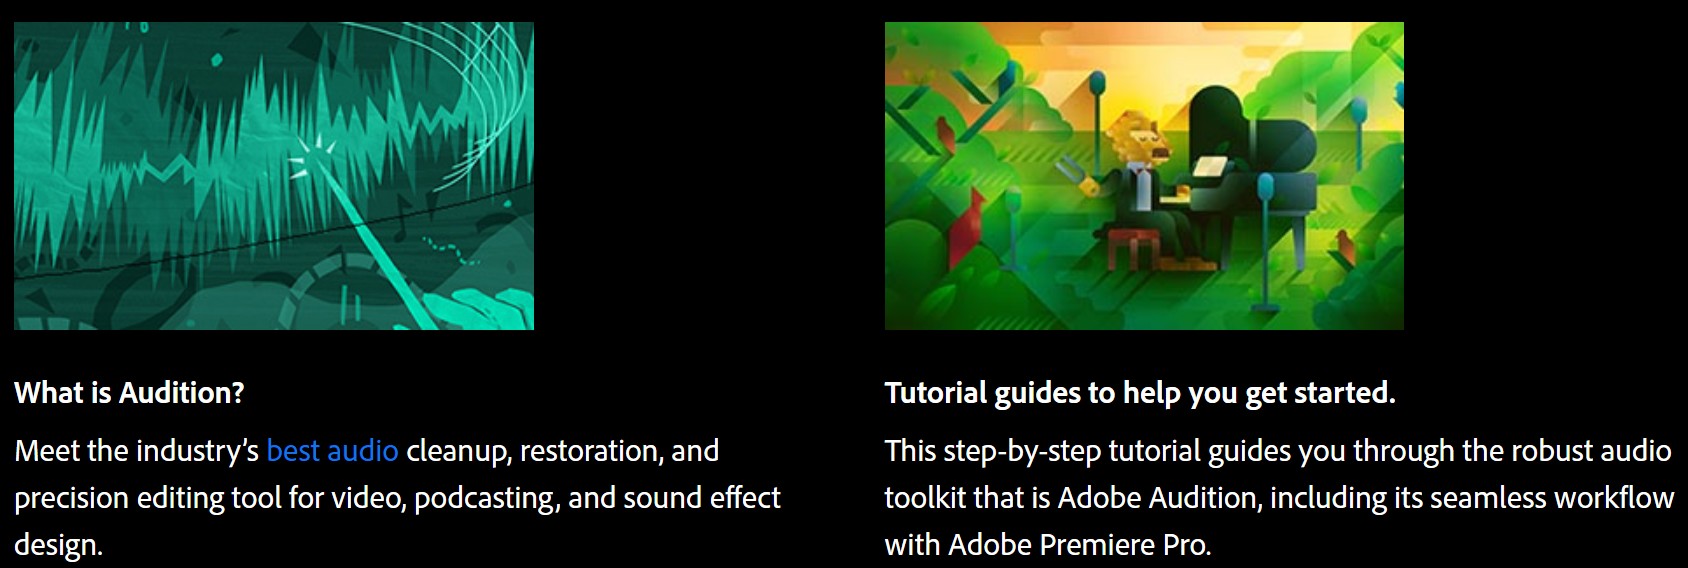 Aoout Adobe Audition for free